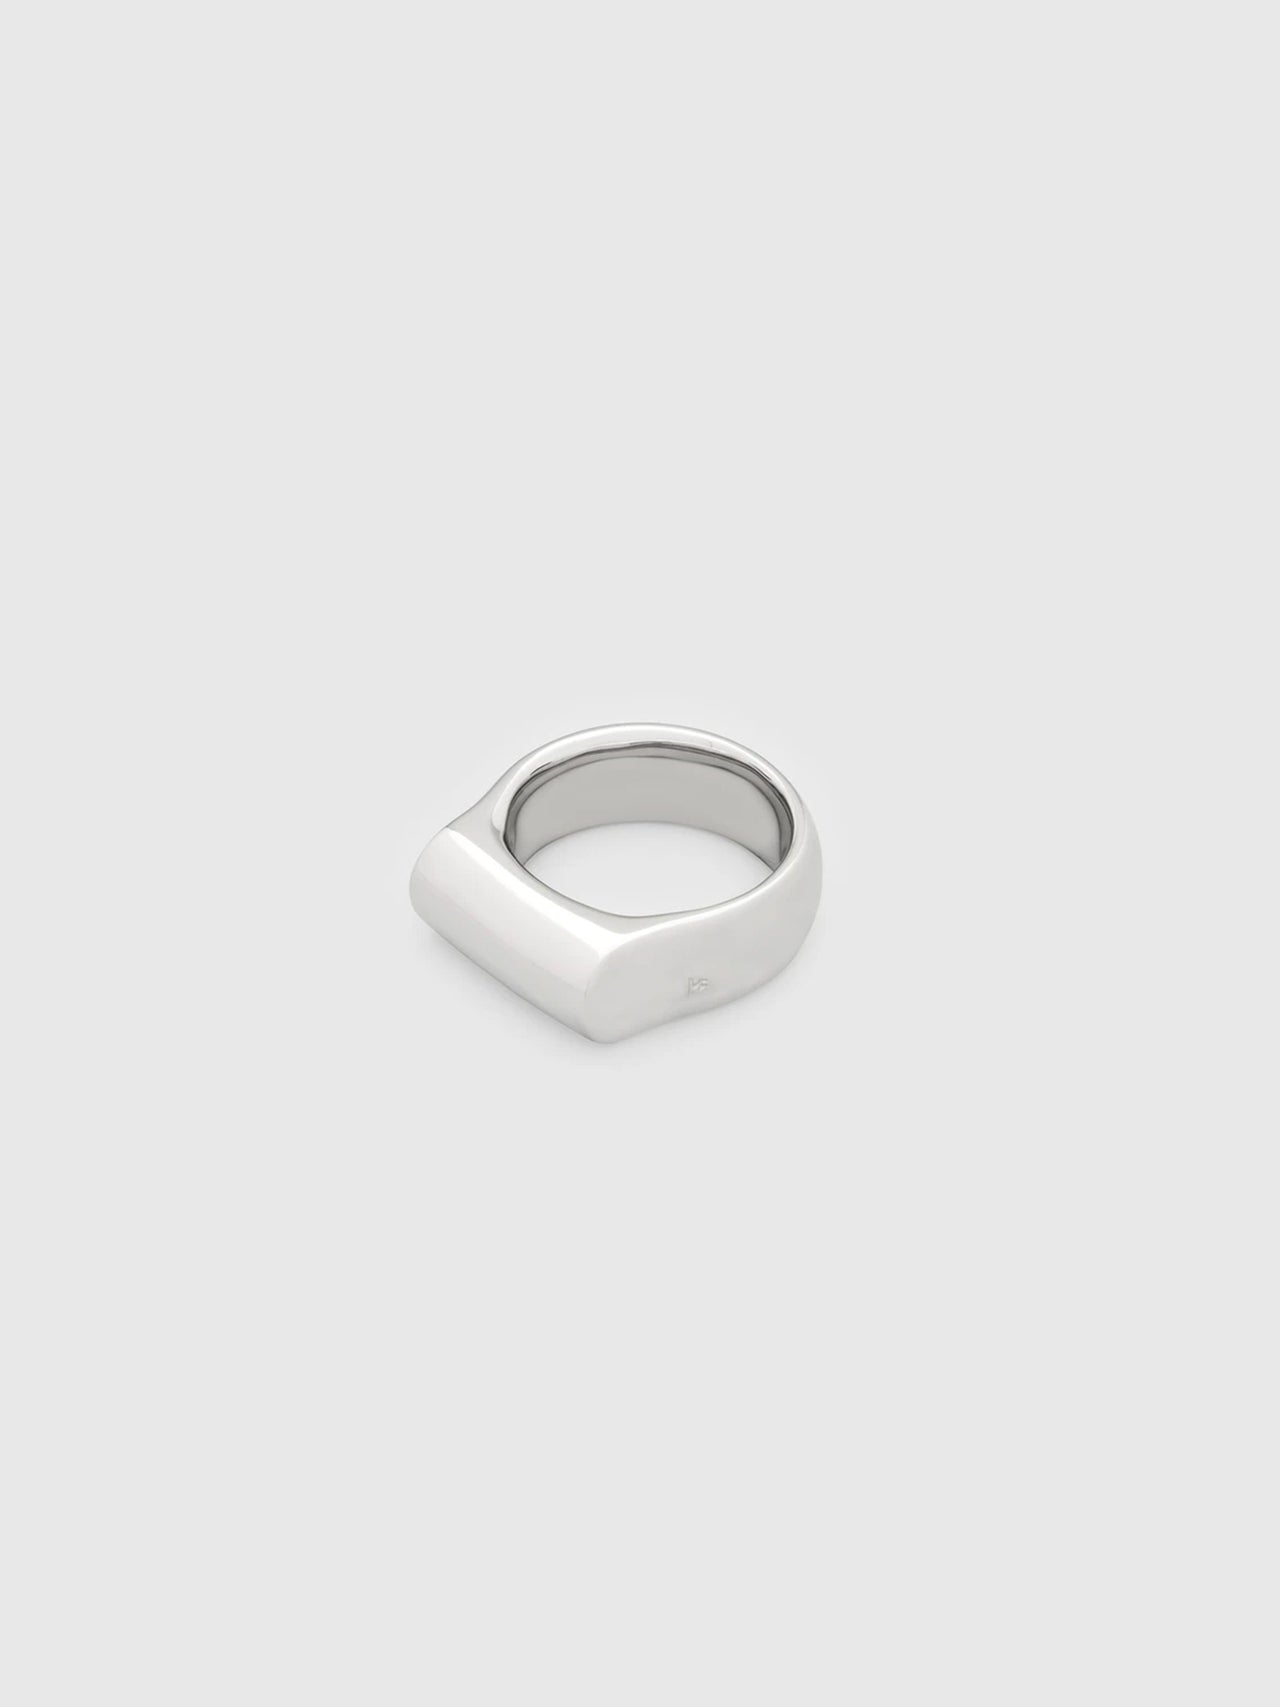 TOMWOOD / Crest Ring (SILVER)